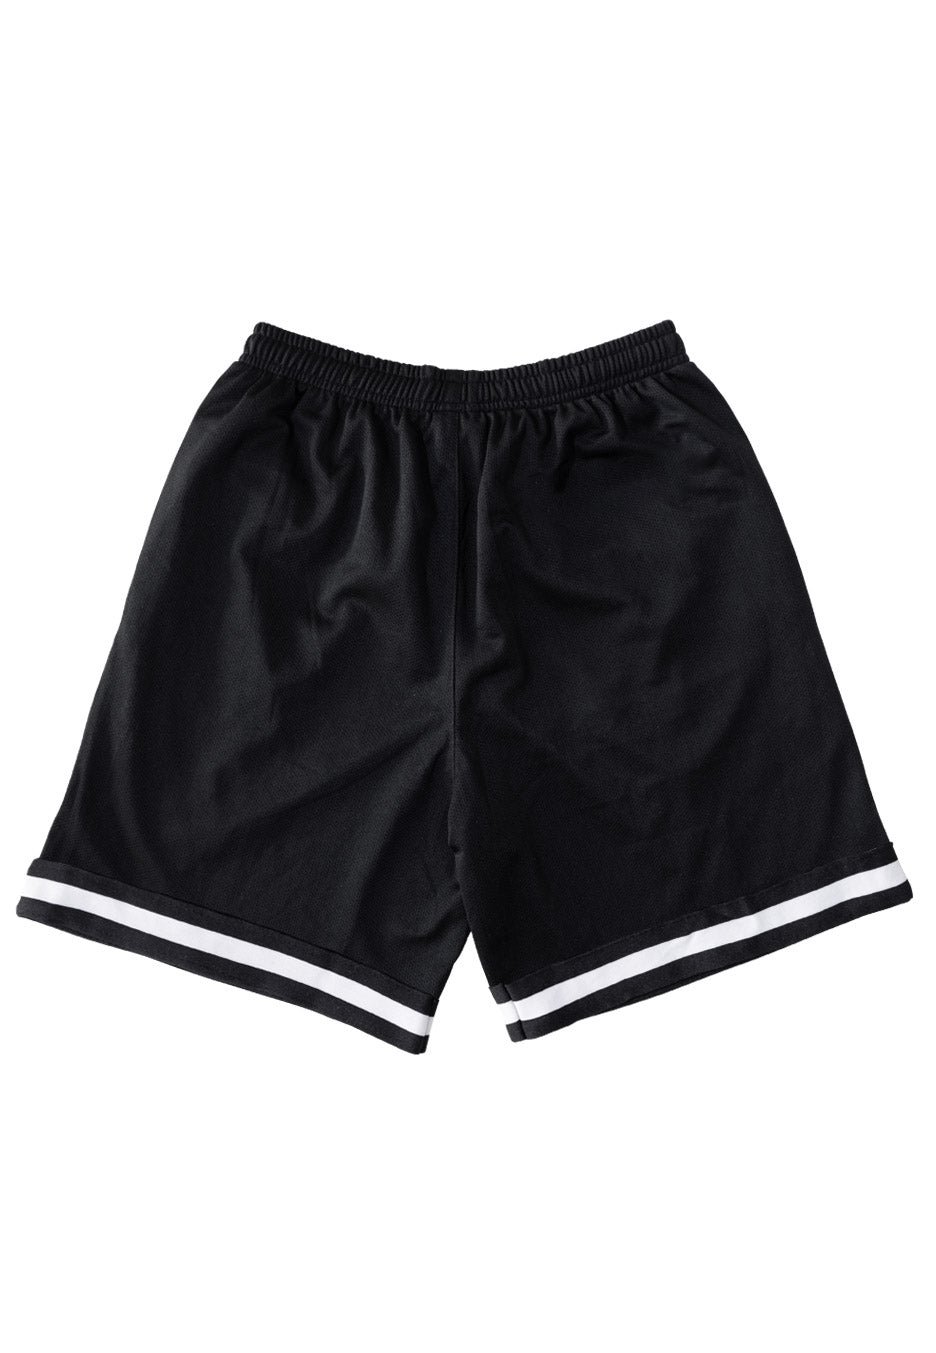 Parkway Drive - Stop Me Striped - Shorts